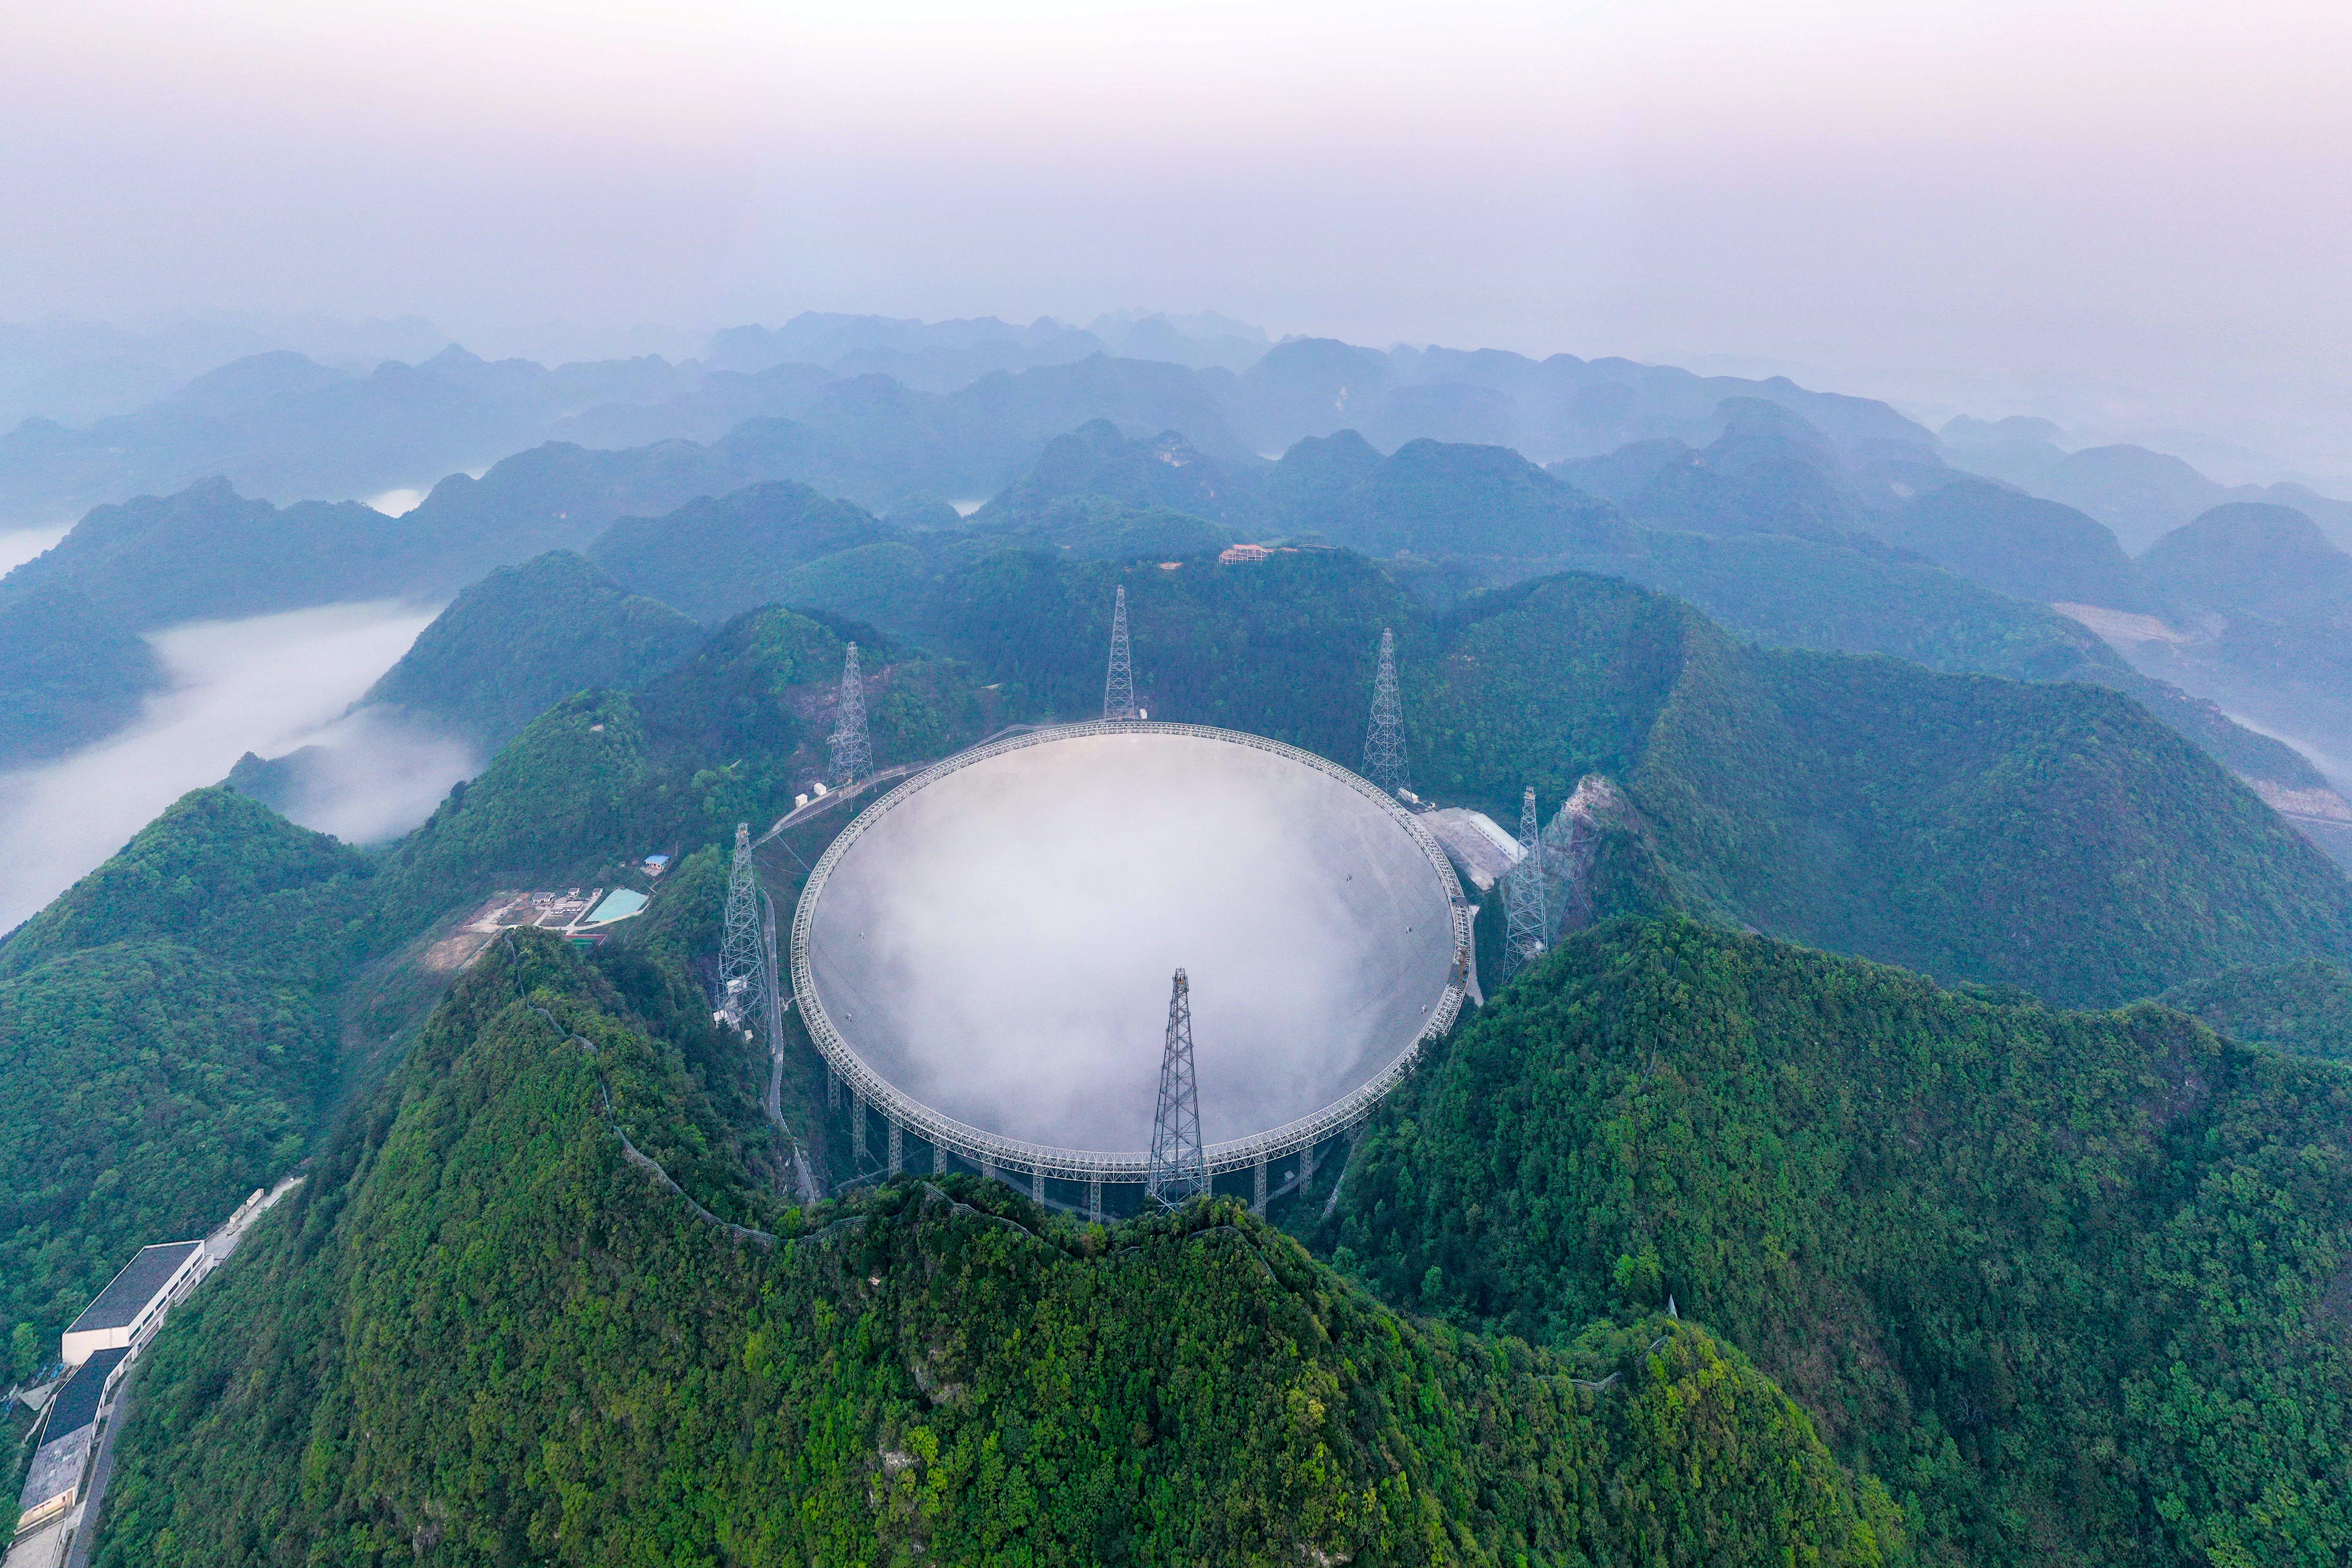 A giant spherical dish-shaped telescope on the top of a mountain.